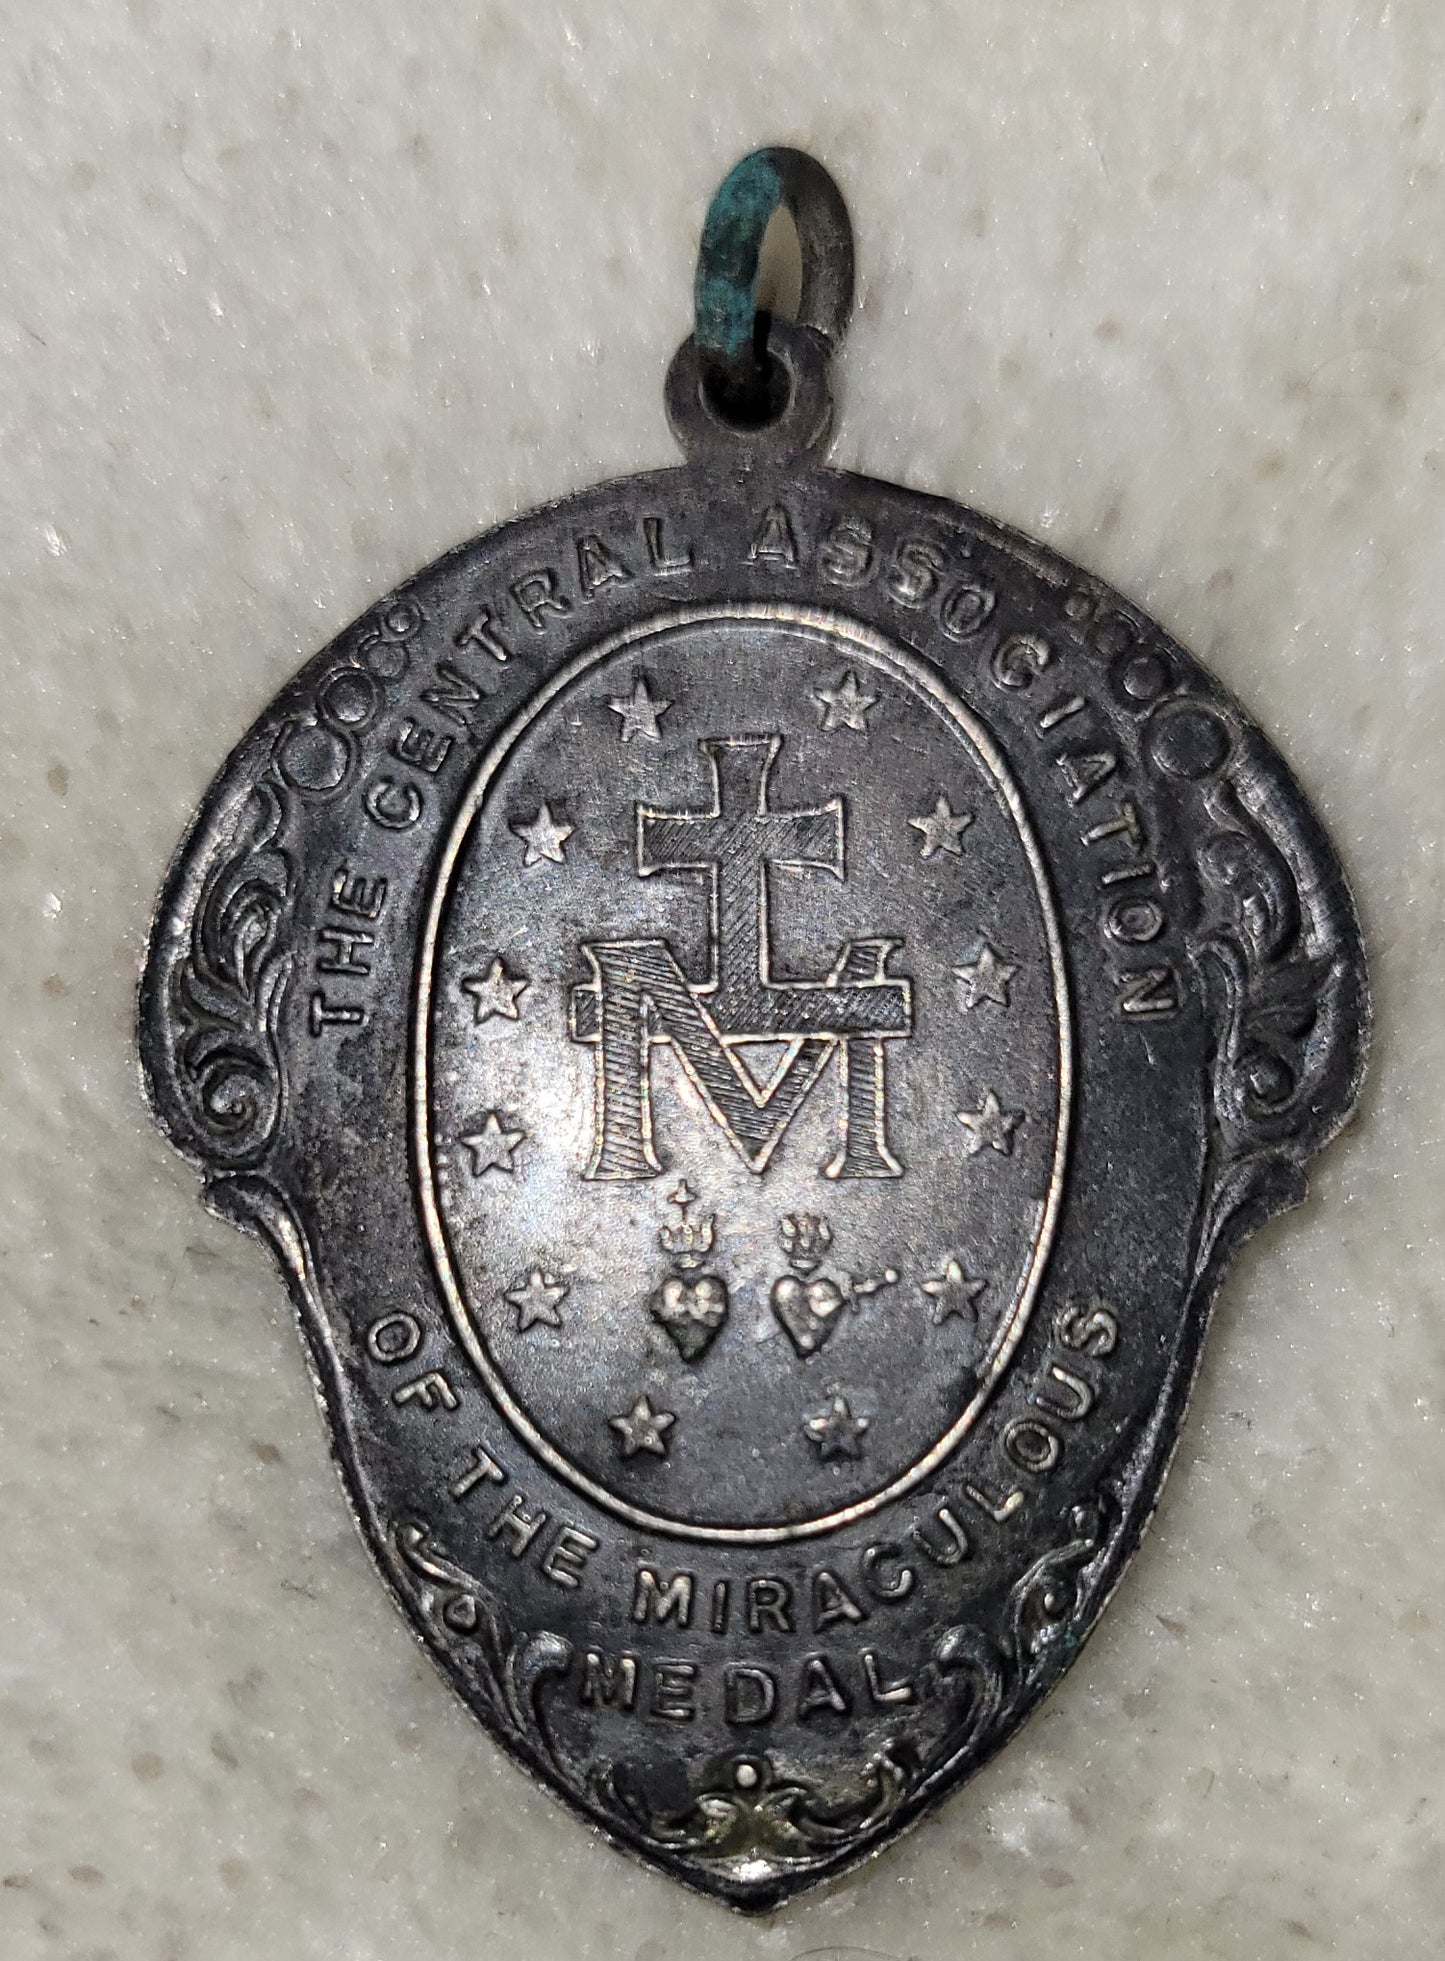 Antique medal The Miraculous Medal Shrine Pendant Germantown PA revealed to St. Catherine Labouré at the Rue de Bac Chapel in 1830 by the Virgin Mary herself. Back view.